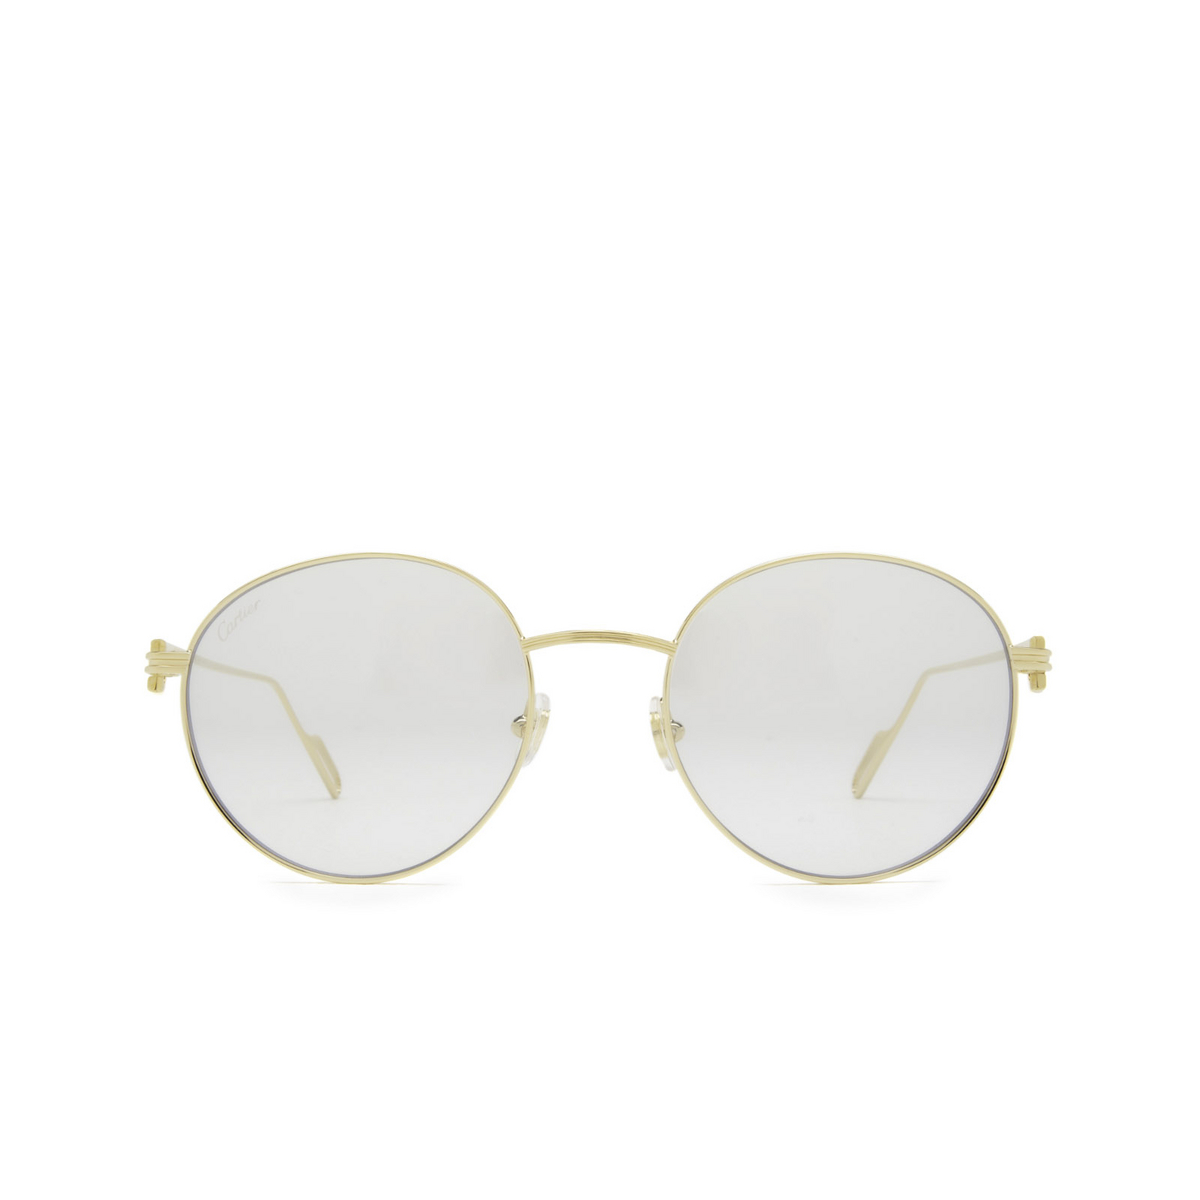 Cartier CT0249S Sunglasses 006 Gold - front view